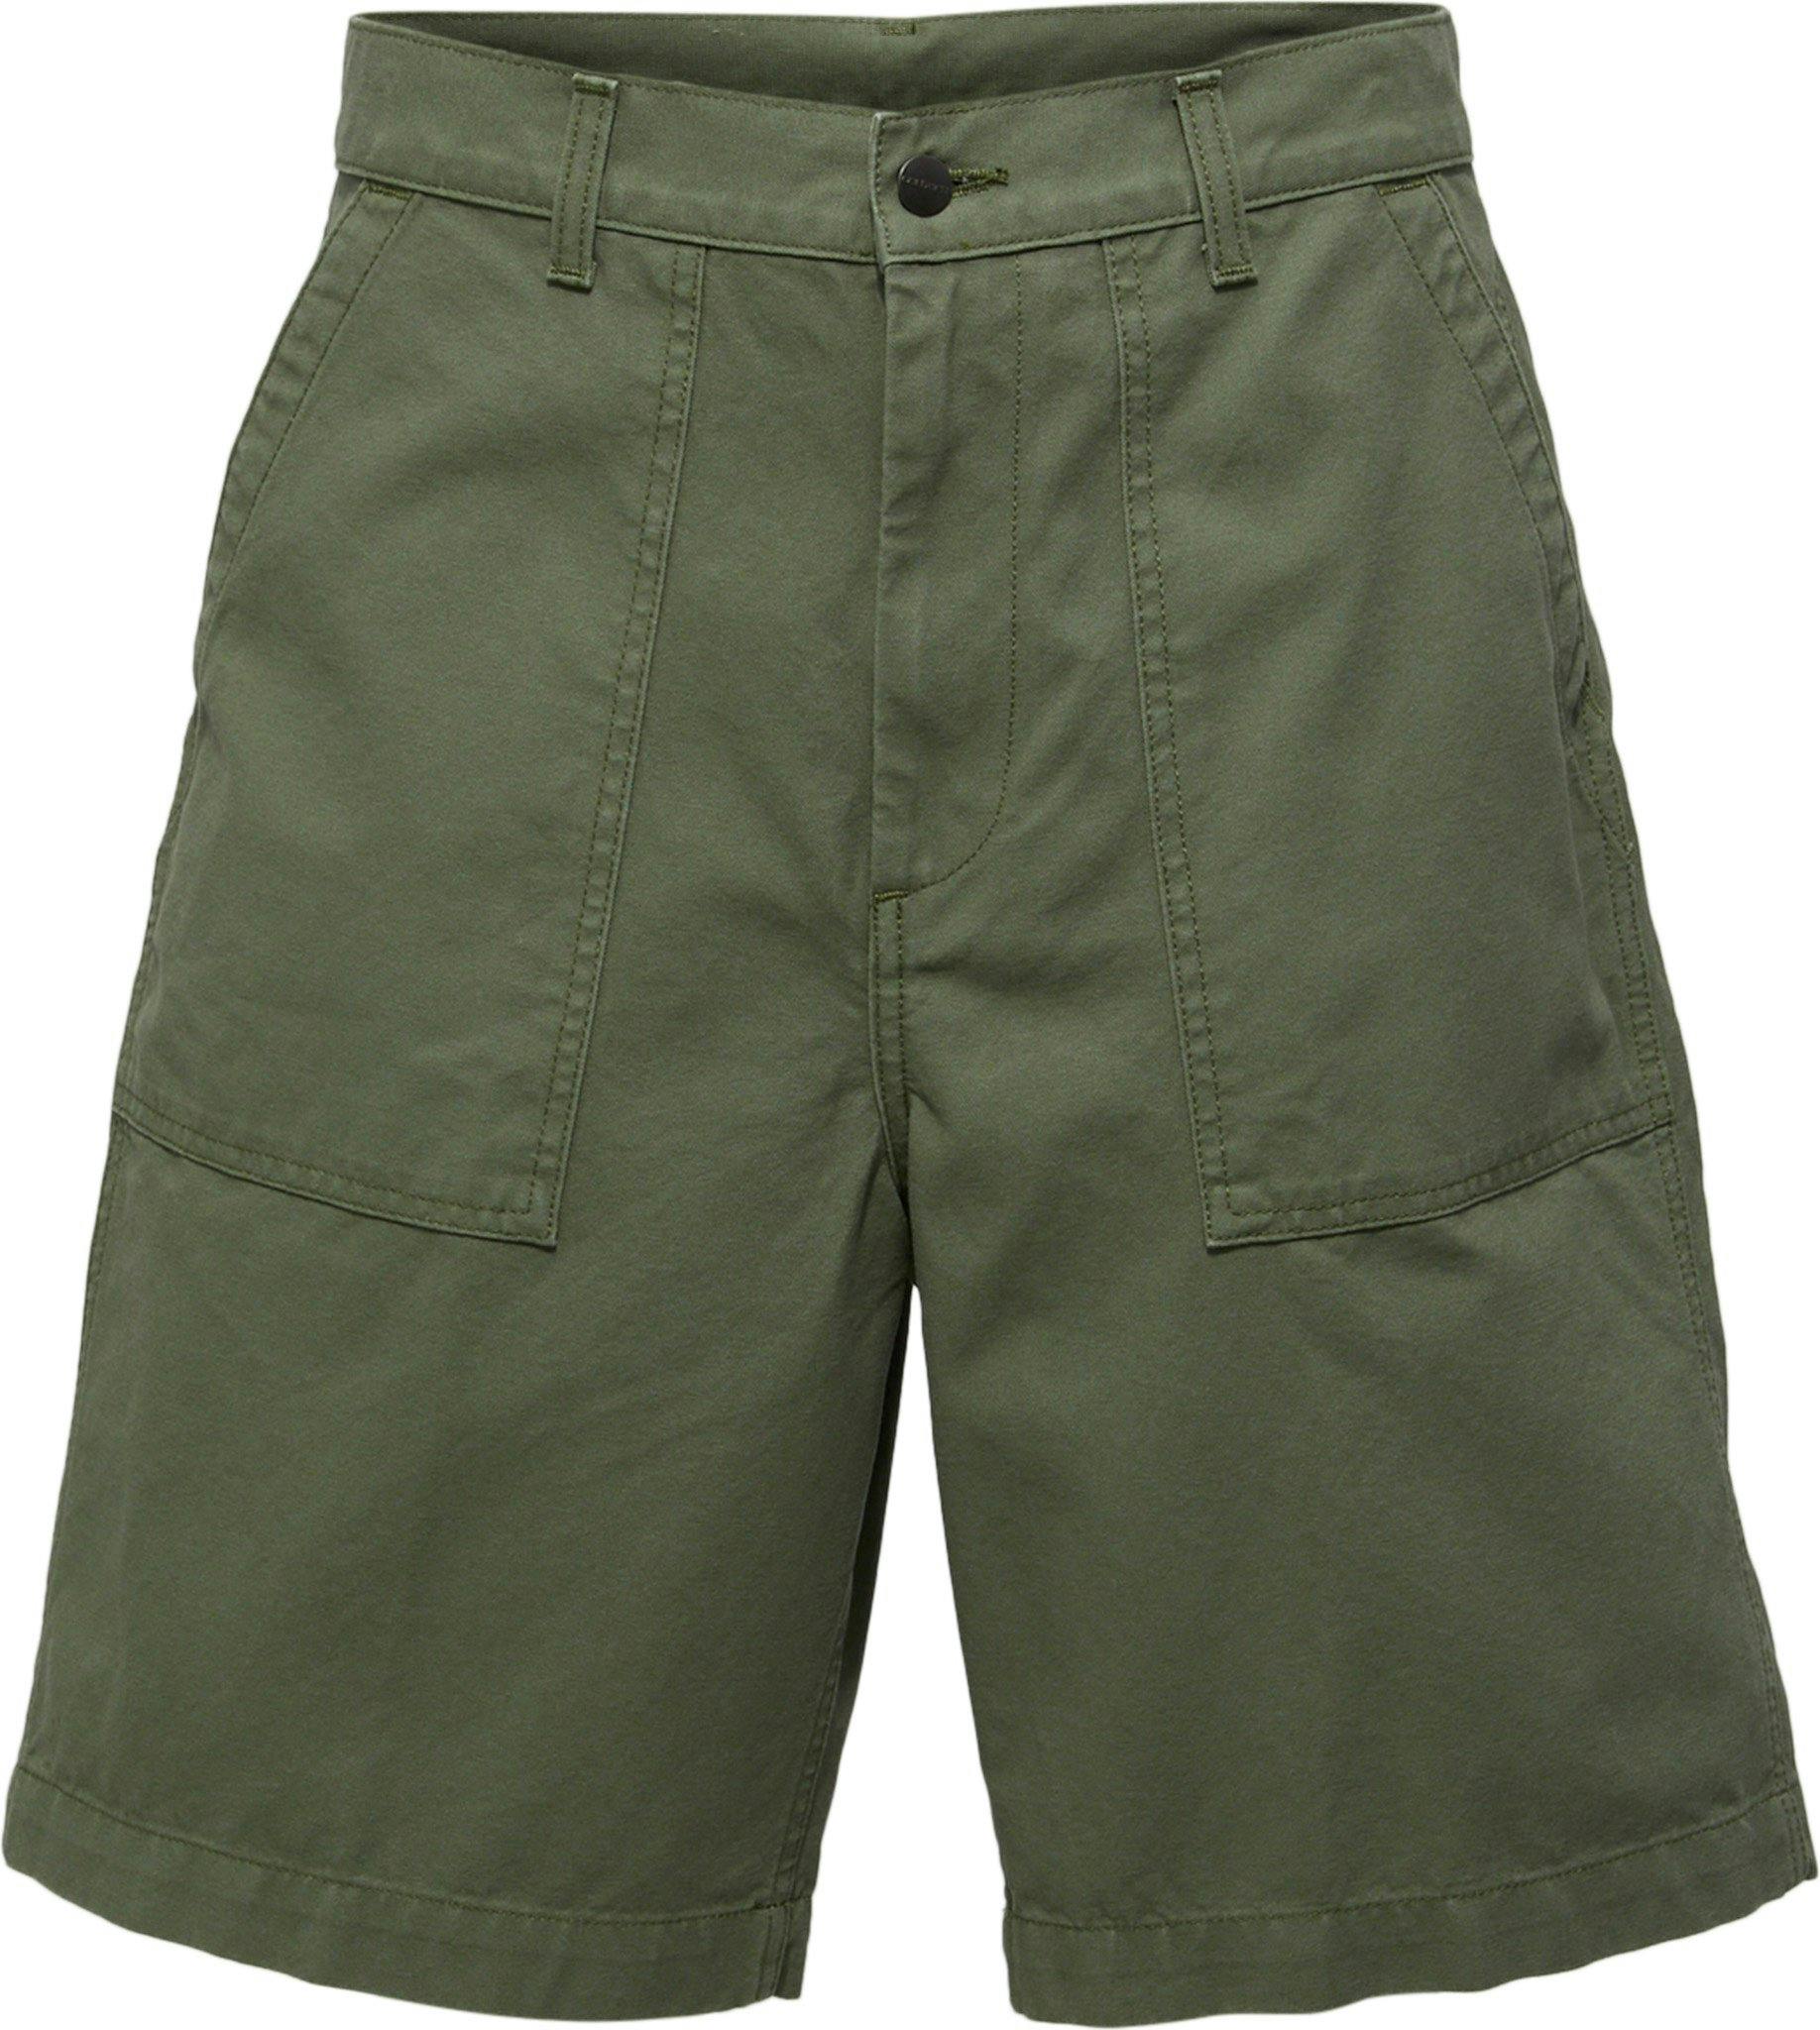 Product image for Council Short - Men's